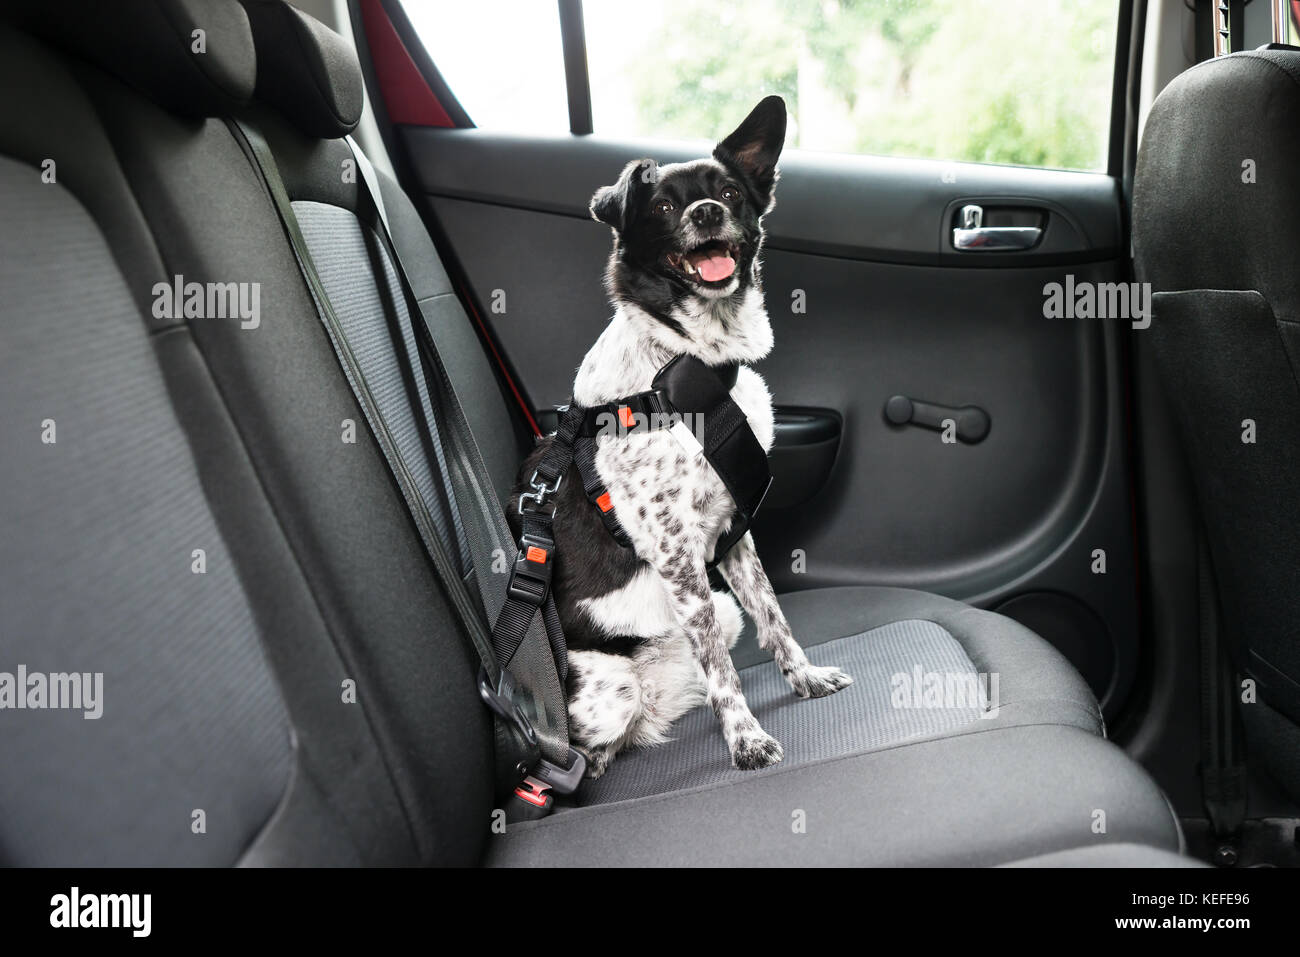 Dog With Sticking Out Tongue Sitting In A Car Seat Stock Photo